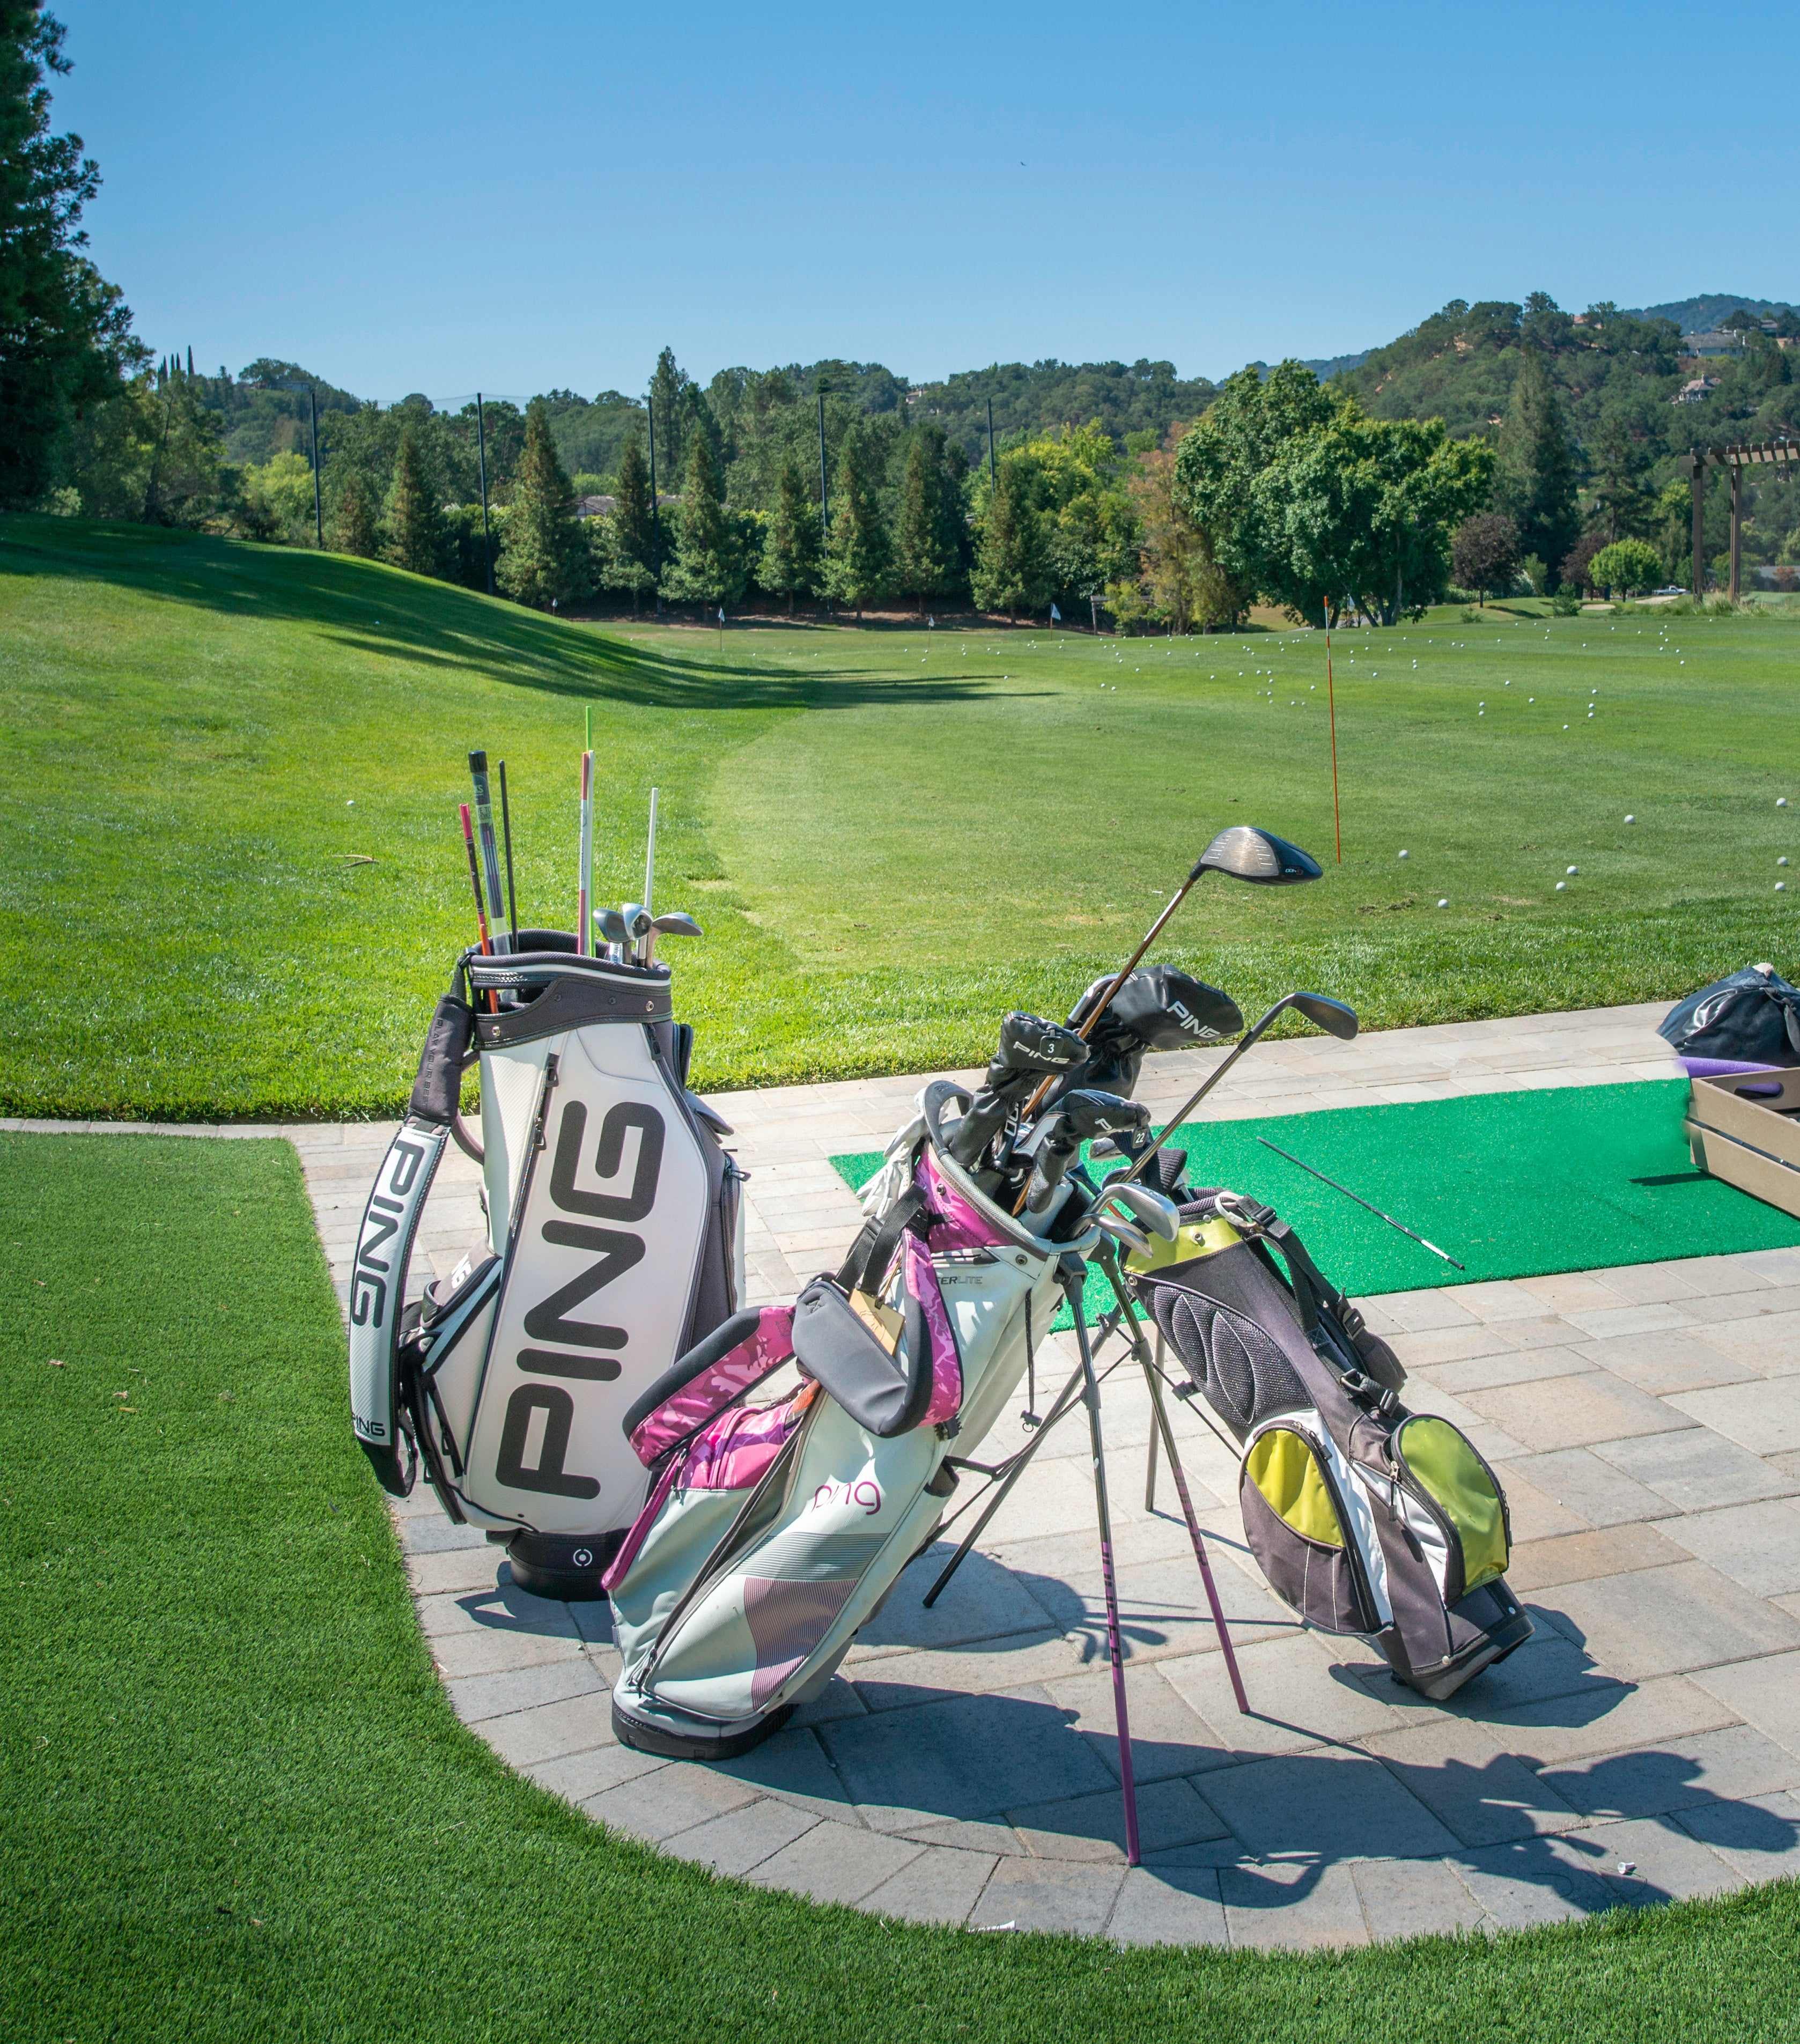 How Much Is a Set of Clubs? Discover Average Price in Canada and Where the Best Offers Are